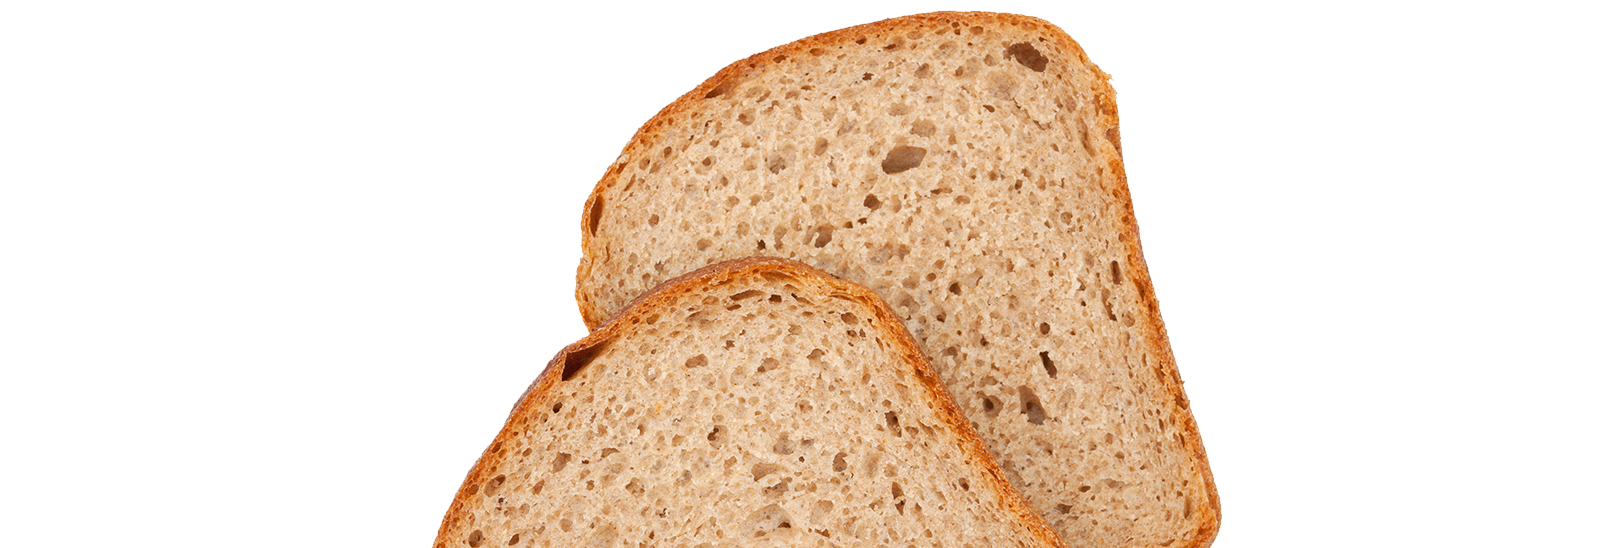 Picture of whole wheat bread.